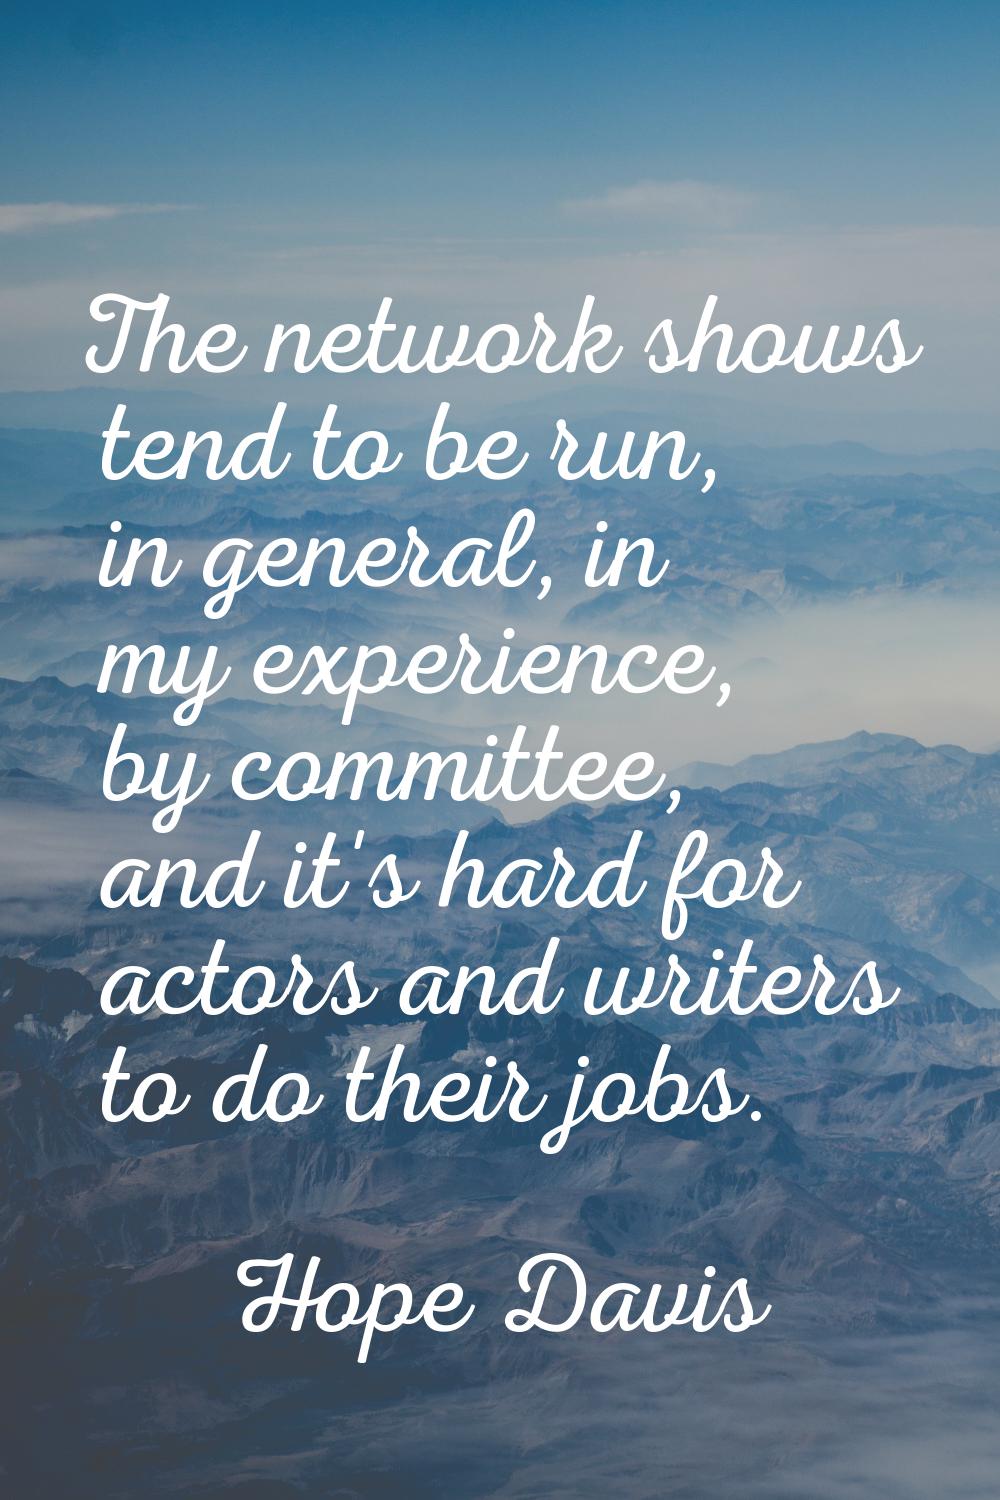 The network shows tend to be run, in general, in my experience, by committee, and it's hard for act